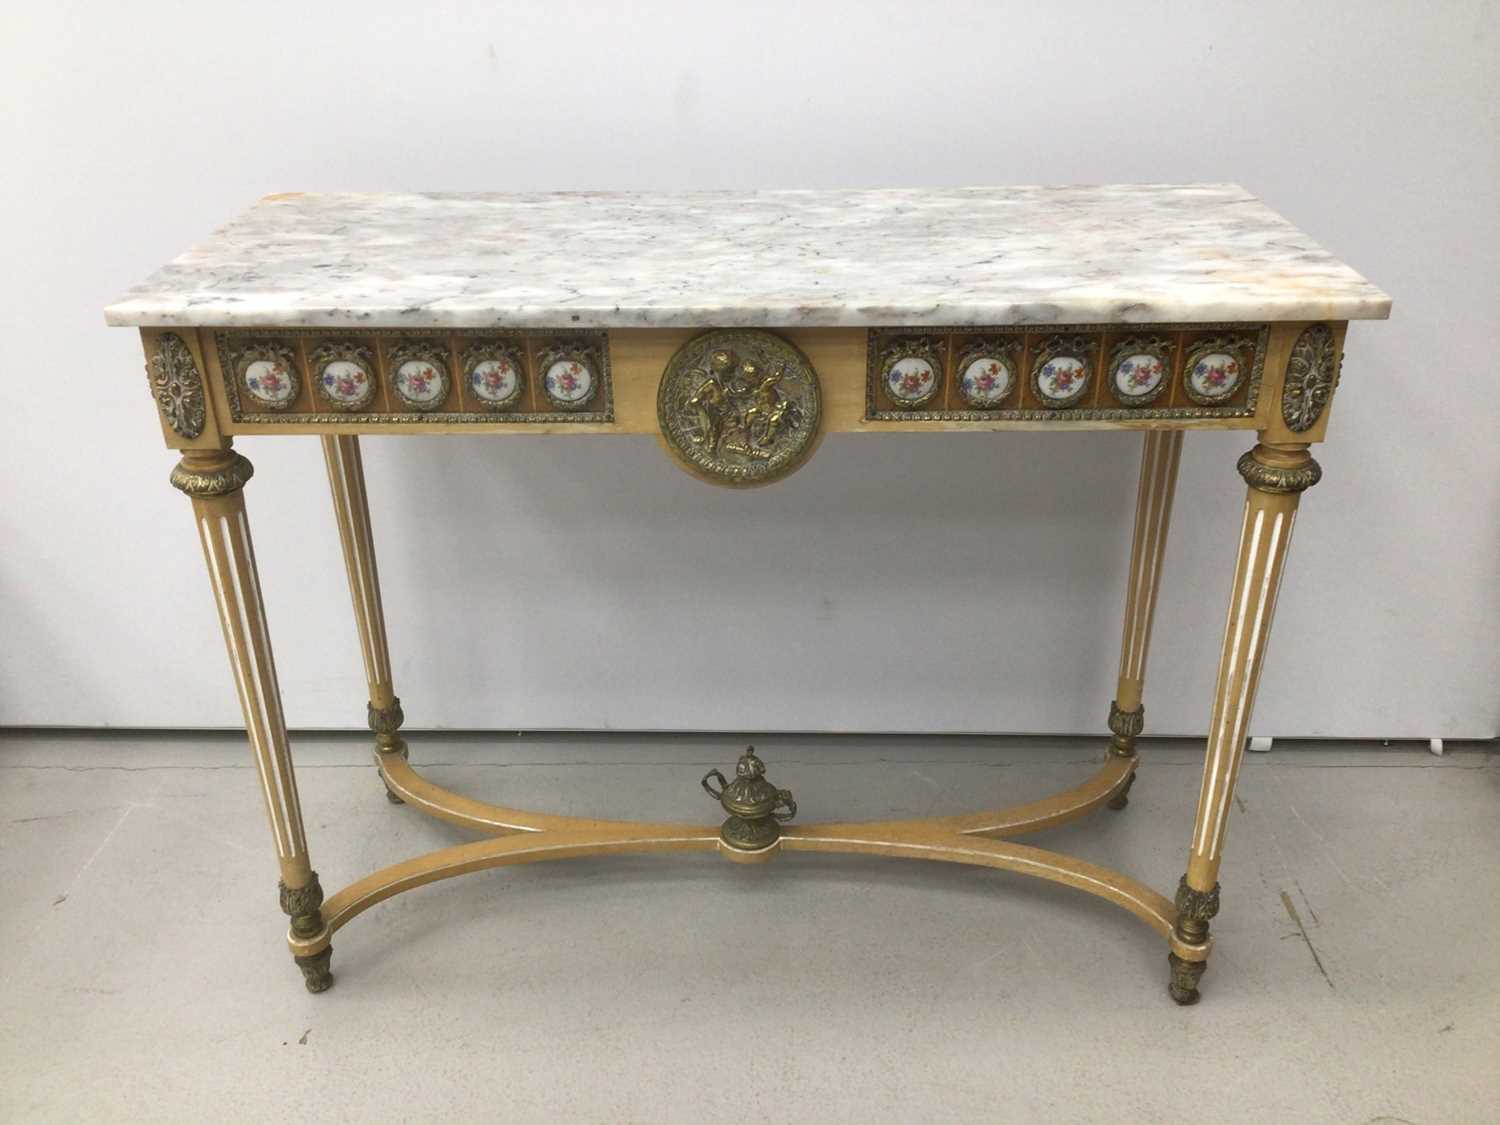 Lot 87 - Antique style hall table with marble top, frieze inset with porcelain plaques on fluted turned legs joined by stretchers 107cm wide x 43cm deep x 83cm high